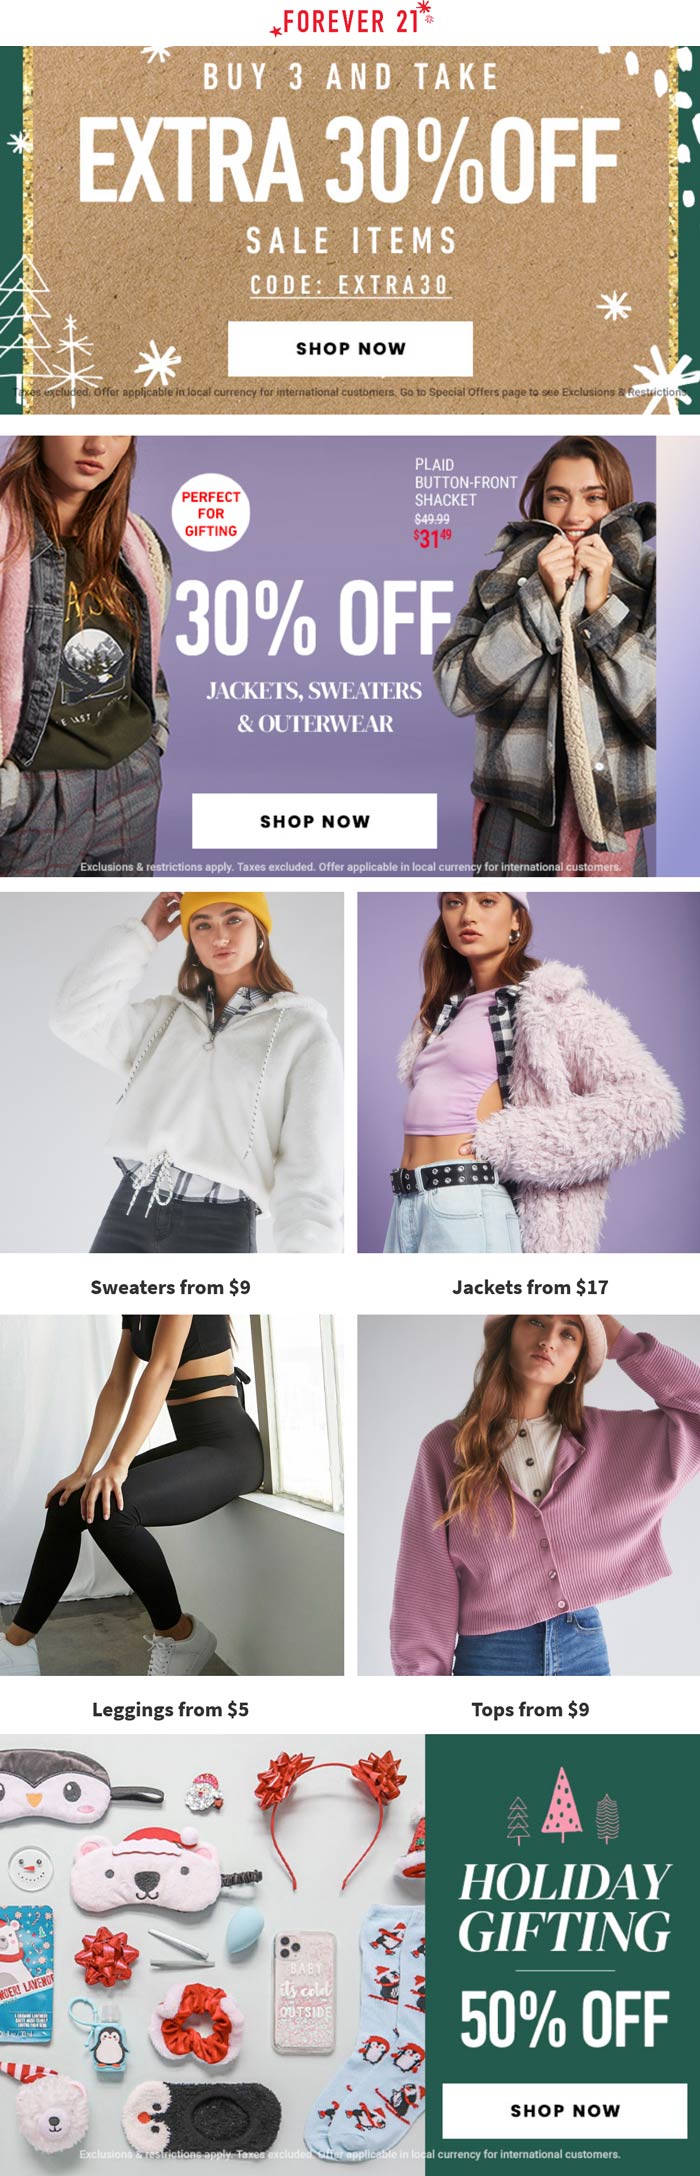 Forever 21 stores Coupon  Extra 30% off 3+ sale items online at Forever 21 via promo code EXTRA30 #forever21 